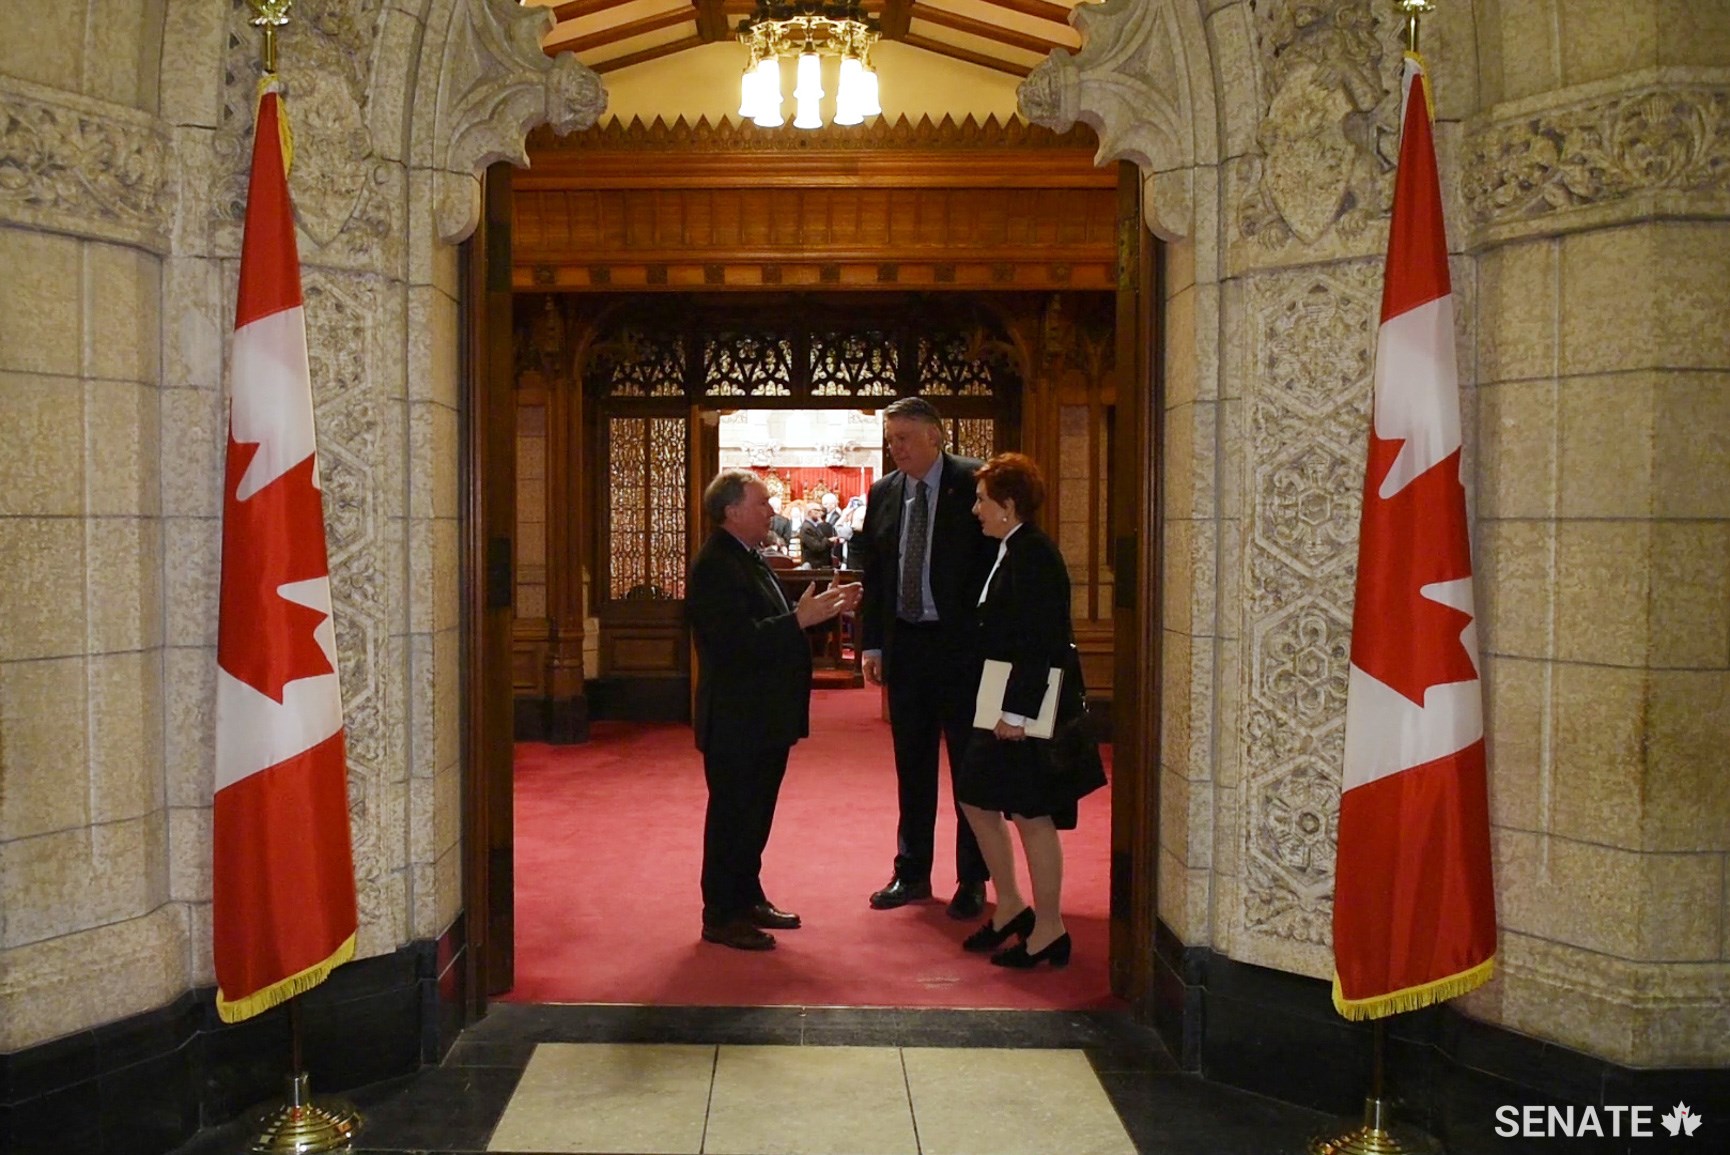 Senators Jim Munson, Scott Tannas and Nicole Eaton chat in the antechamber as they file out of Centre Block’s Senate Chamber for the last time before major restoration work begins in the building.